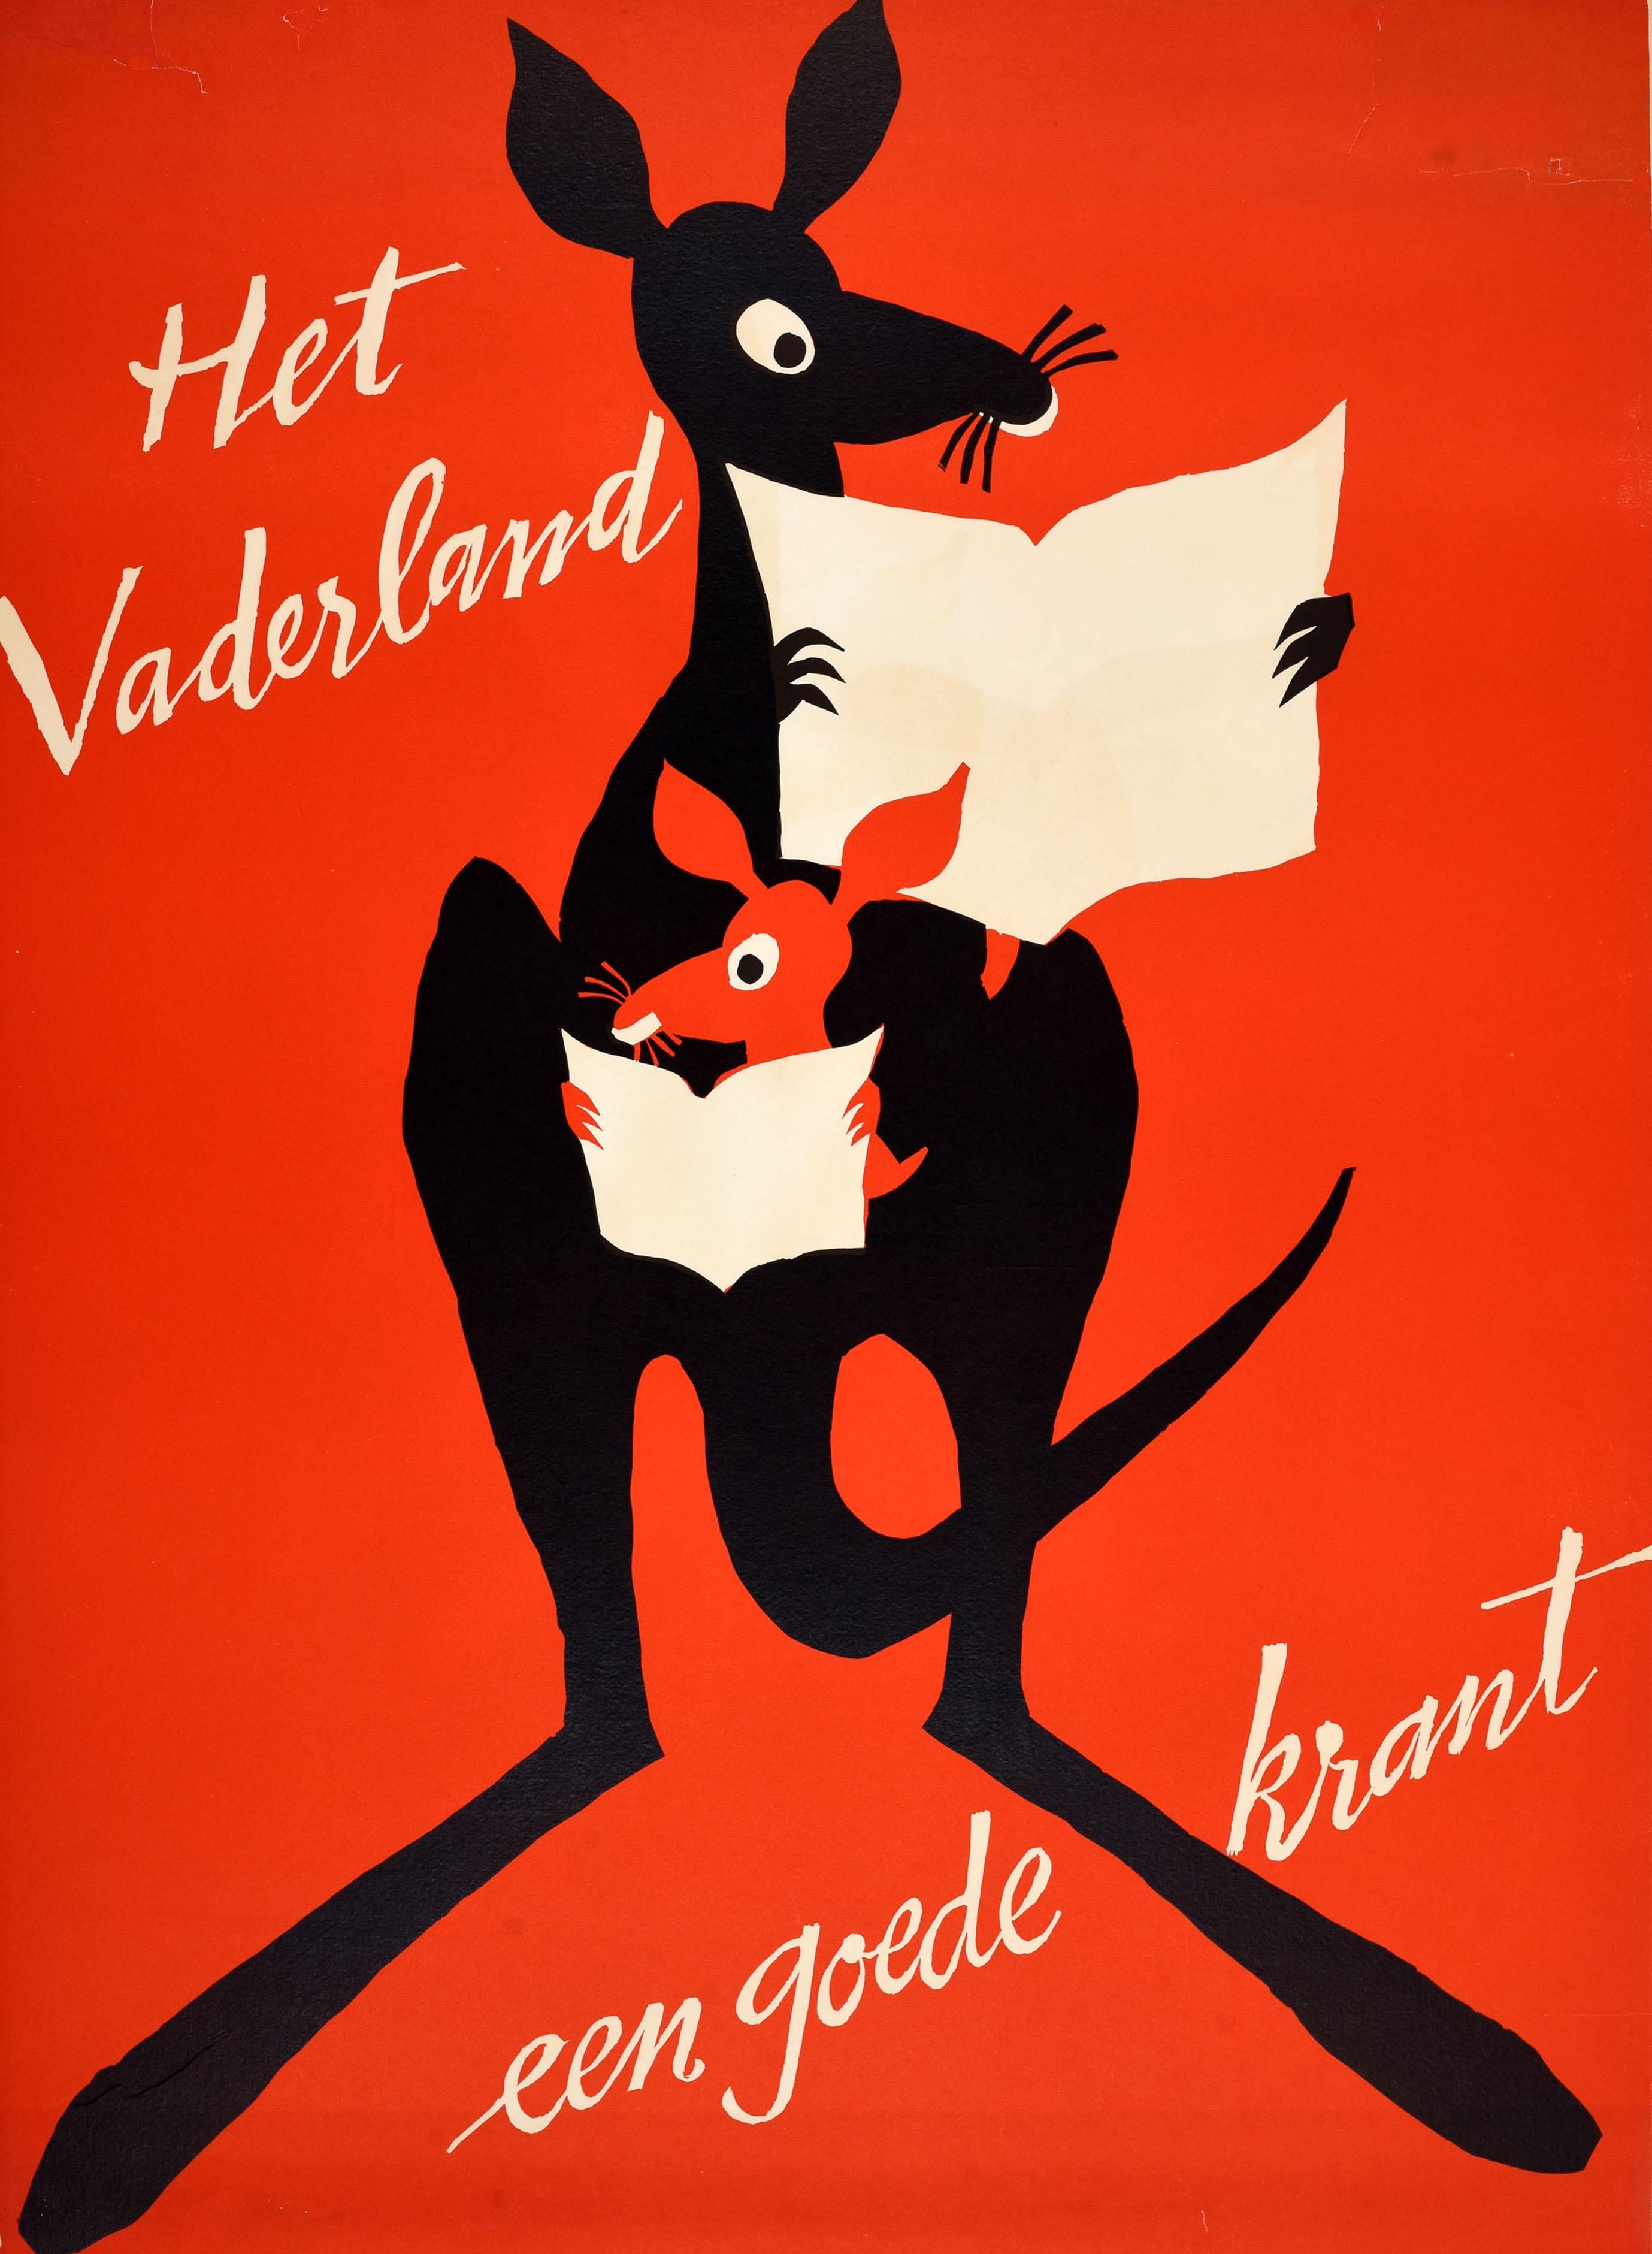 Original vintage advertising poster for Het Vaderland een goede krant / The Fatherland A Good Newspaper featuring a fun design depicting a kangaroo with a joey in its pouch, both reading the newspaper against a red background with handwriting style